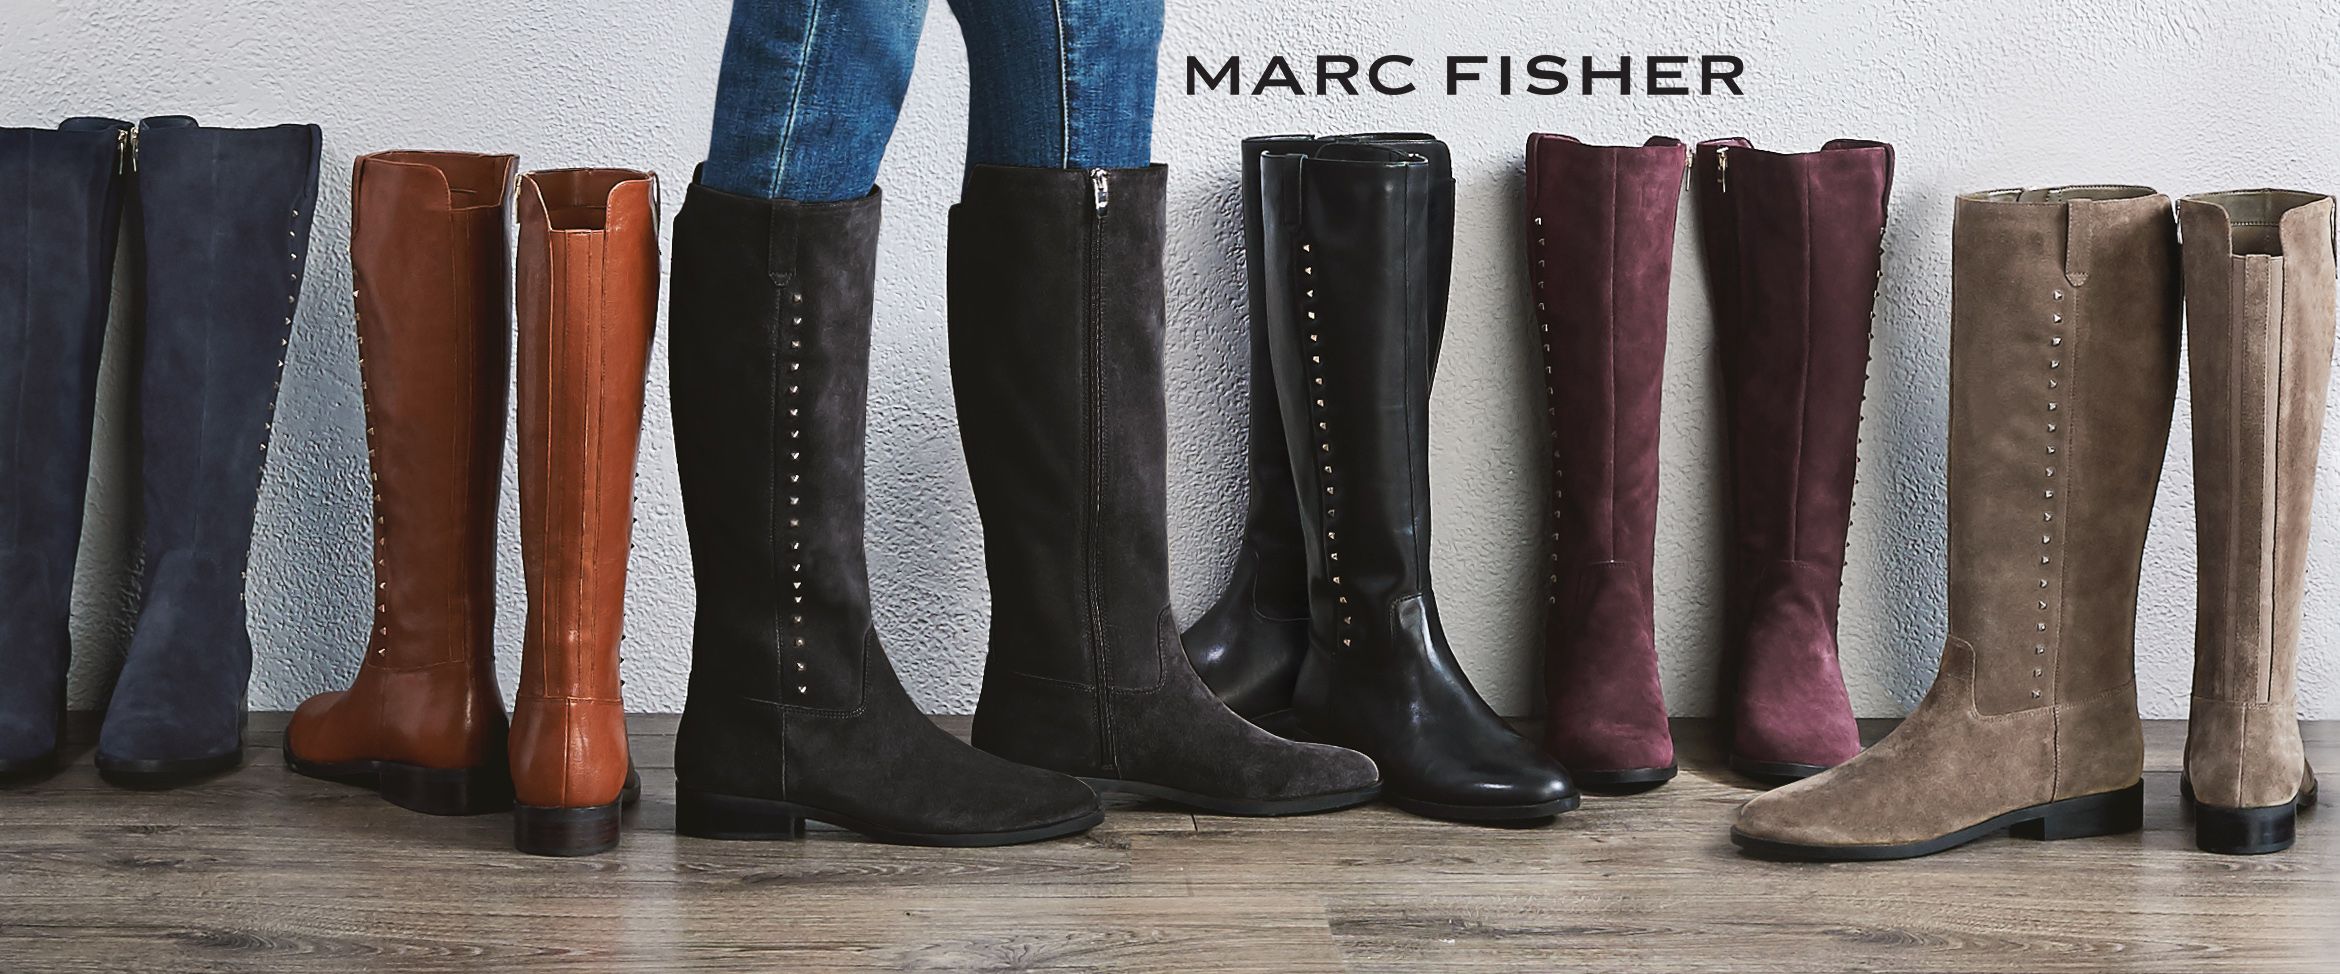 qvc marc fisher boots